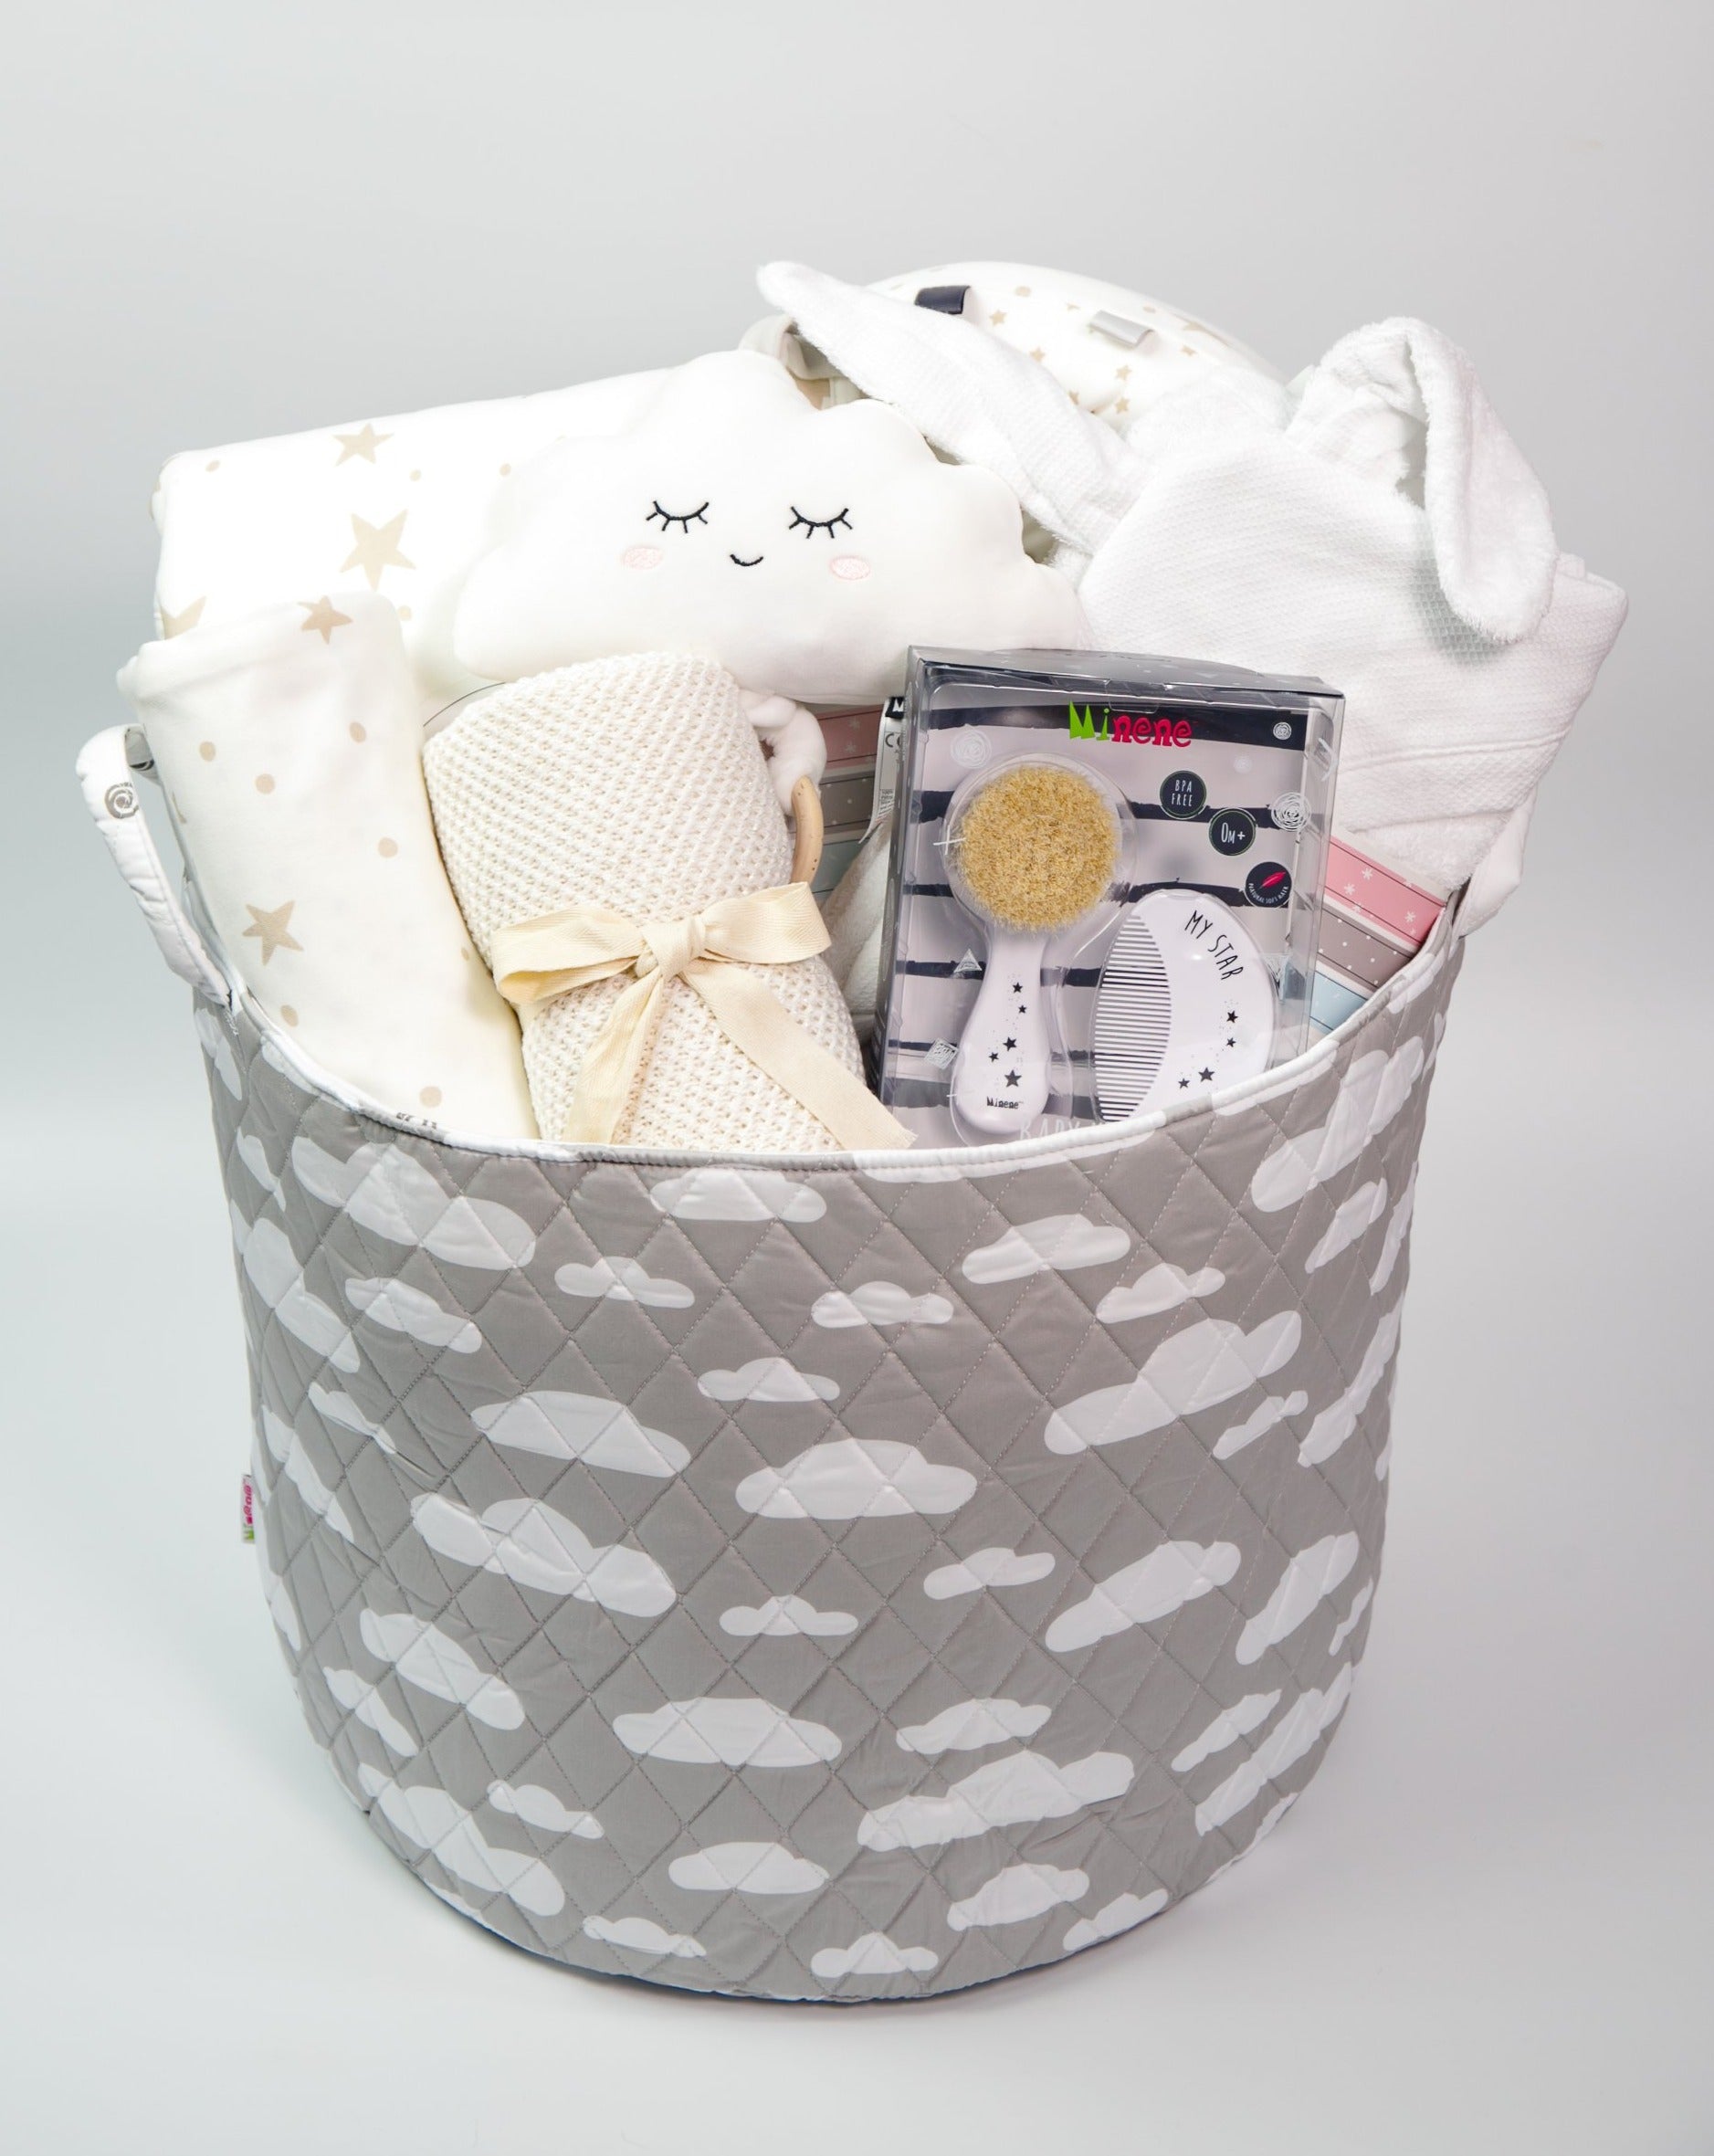 "Welcome To The World Little One" Gift Basket - Light Grey Cloud